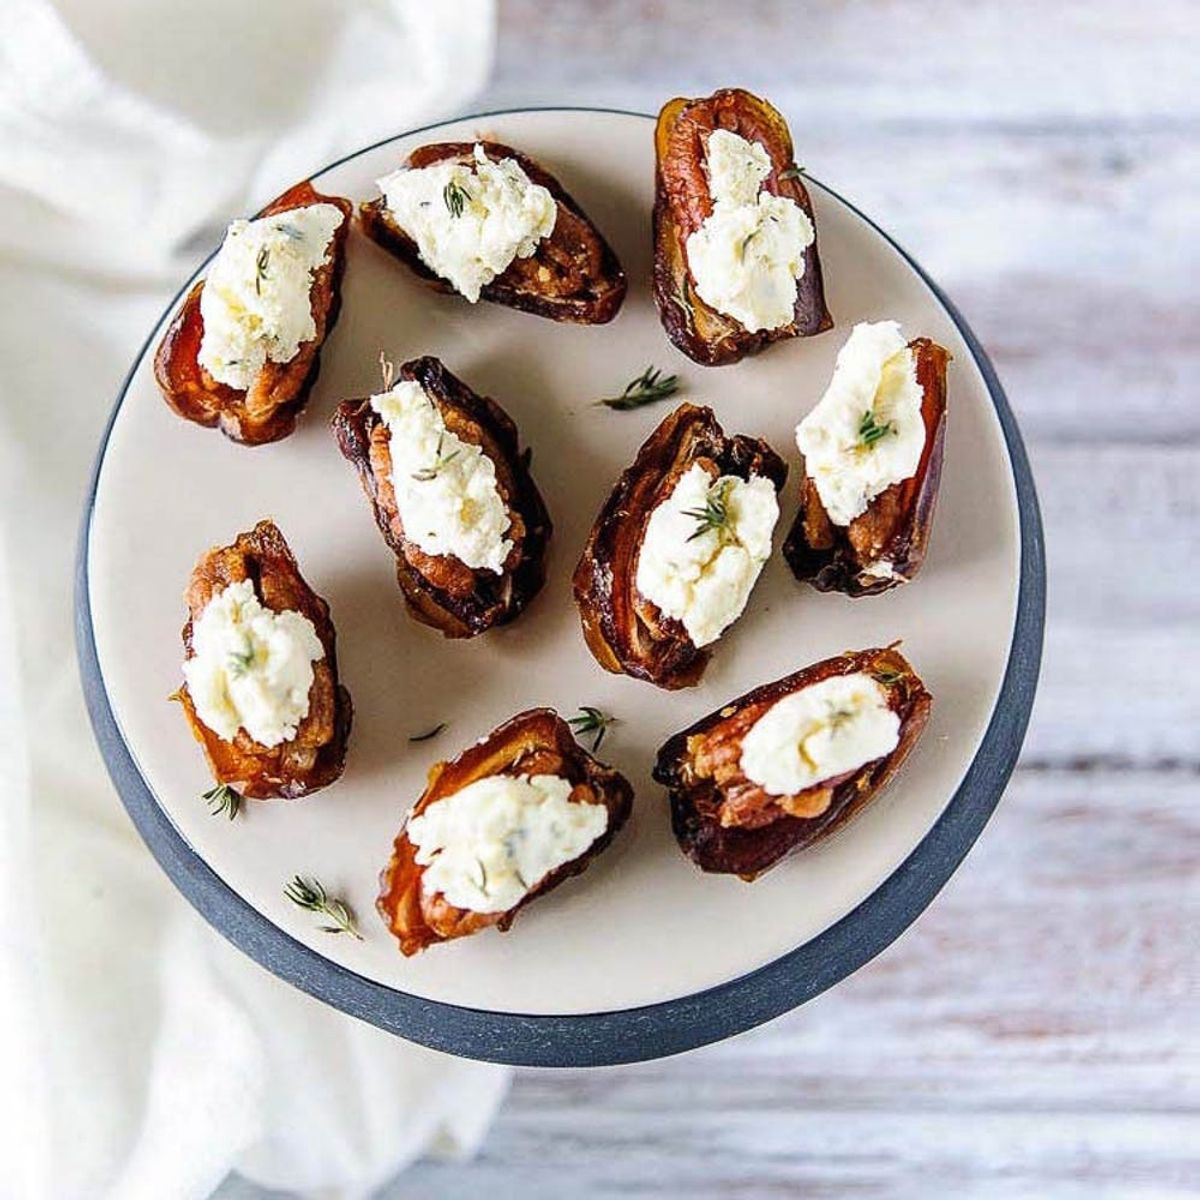 Easy Appetizers to Make for Your Oscars Party